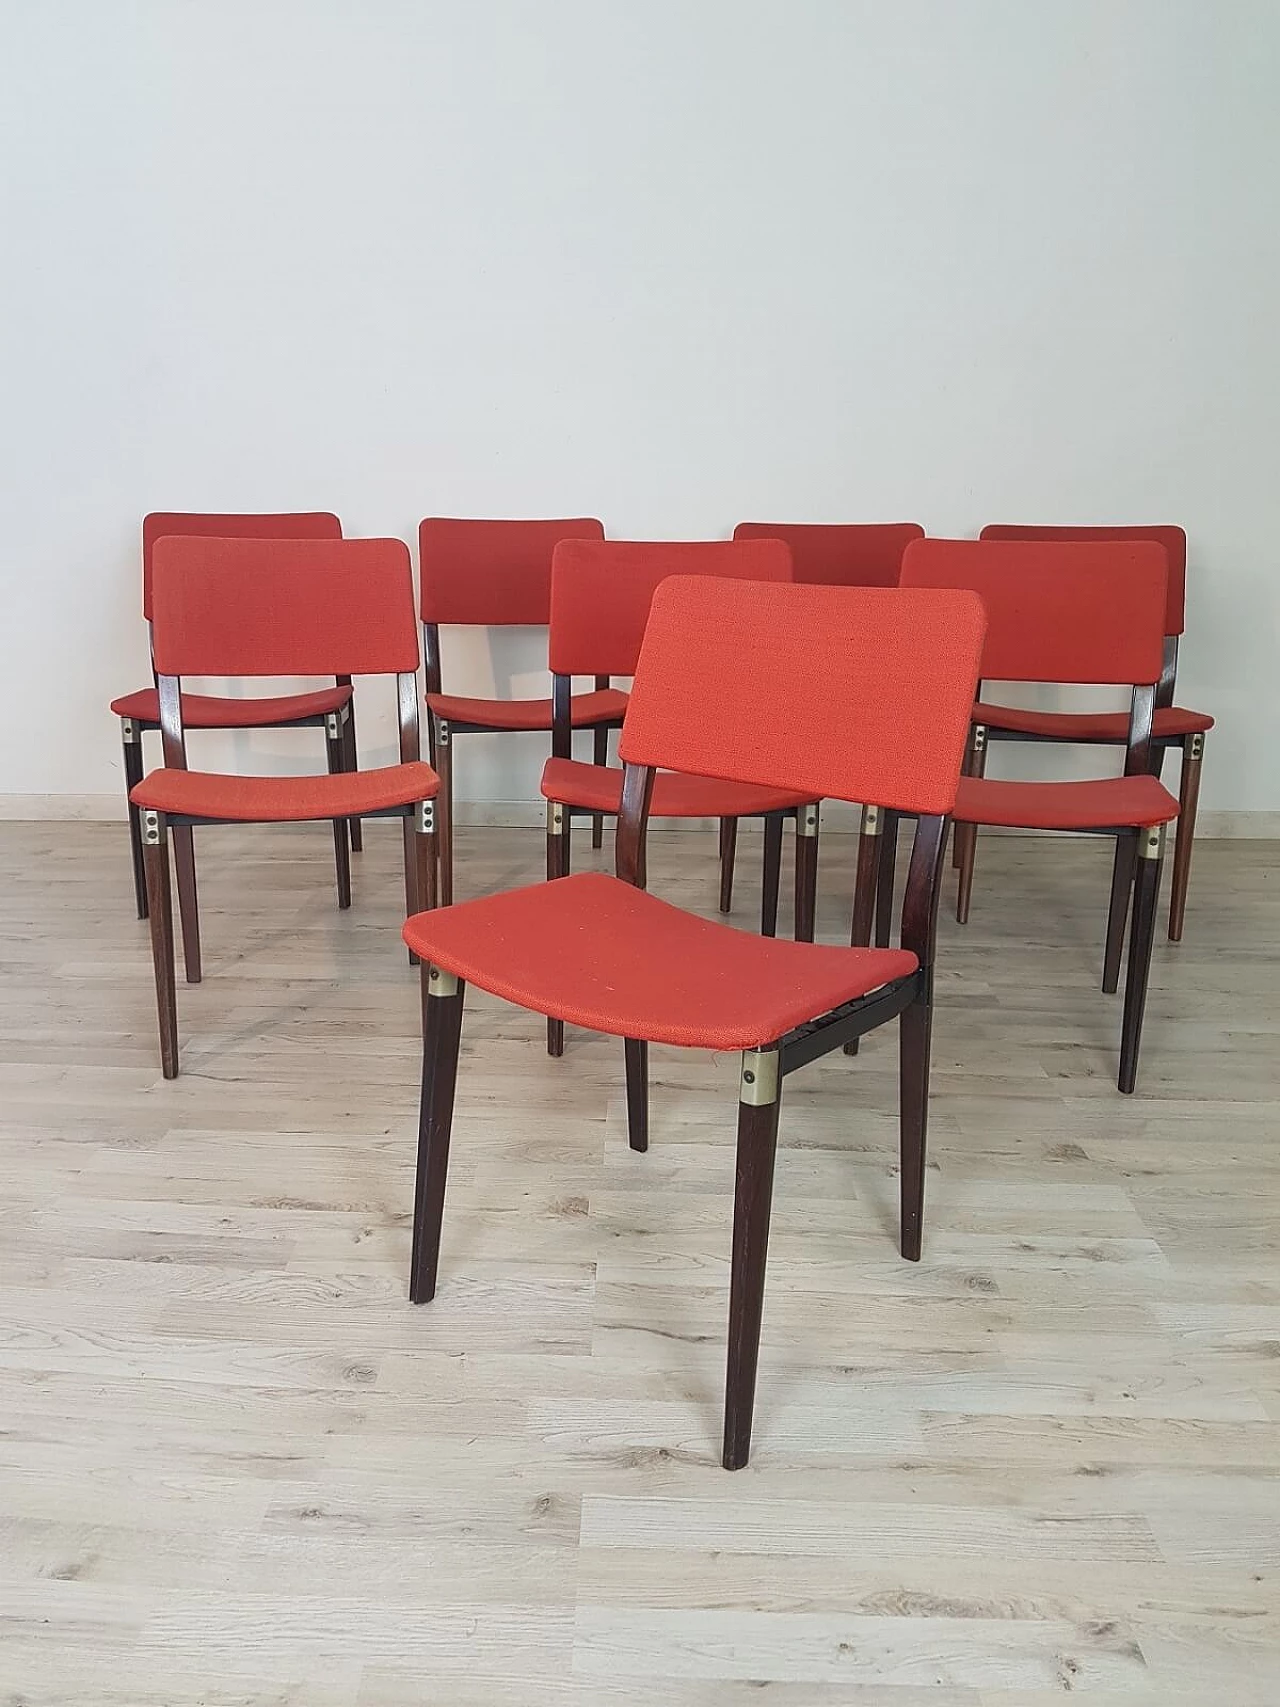 Set of 8 chairs "S82" by Eugenio Gerli for Tecno 3